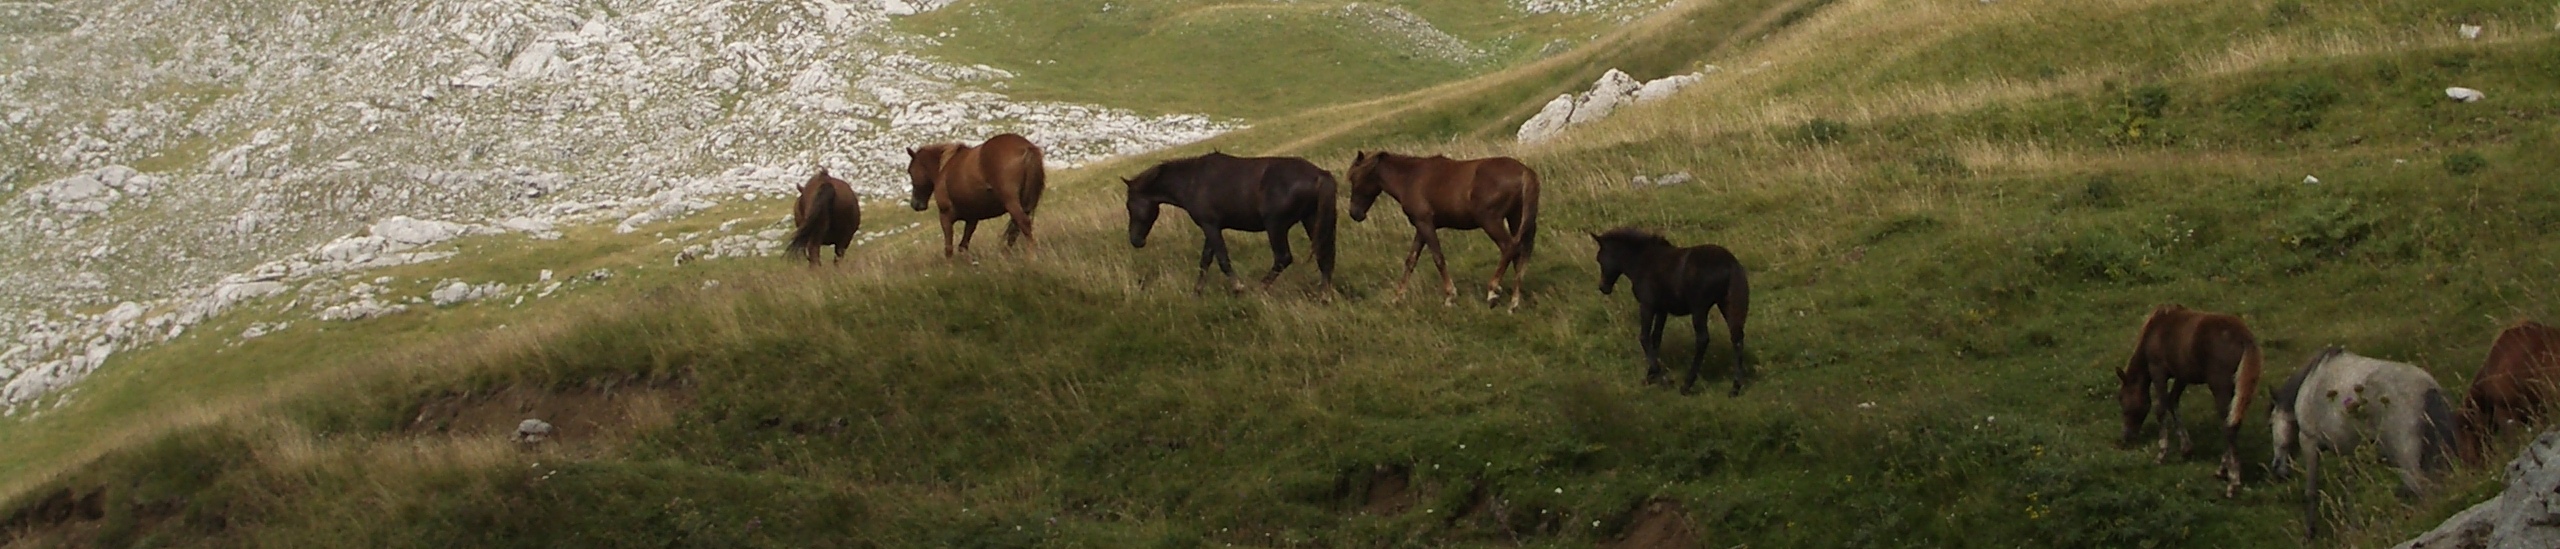 image of wild horses roaming free in the highlands of Montenegro